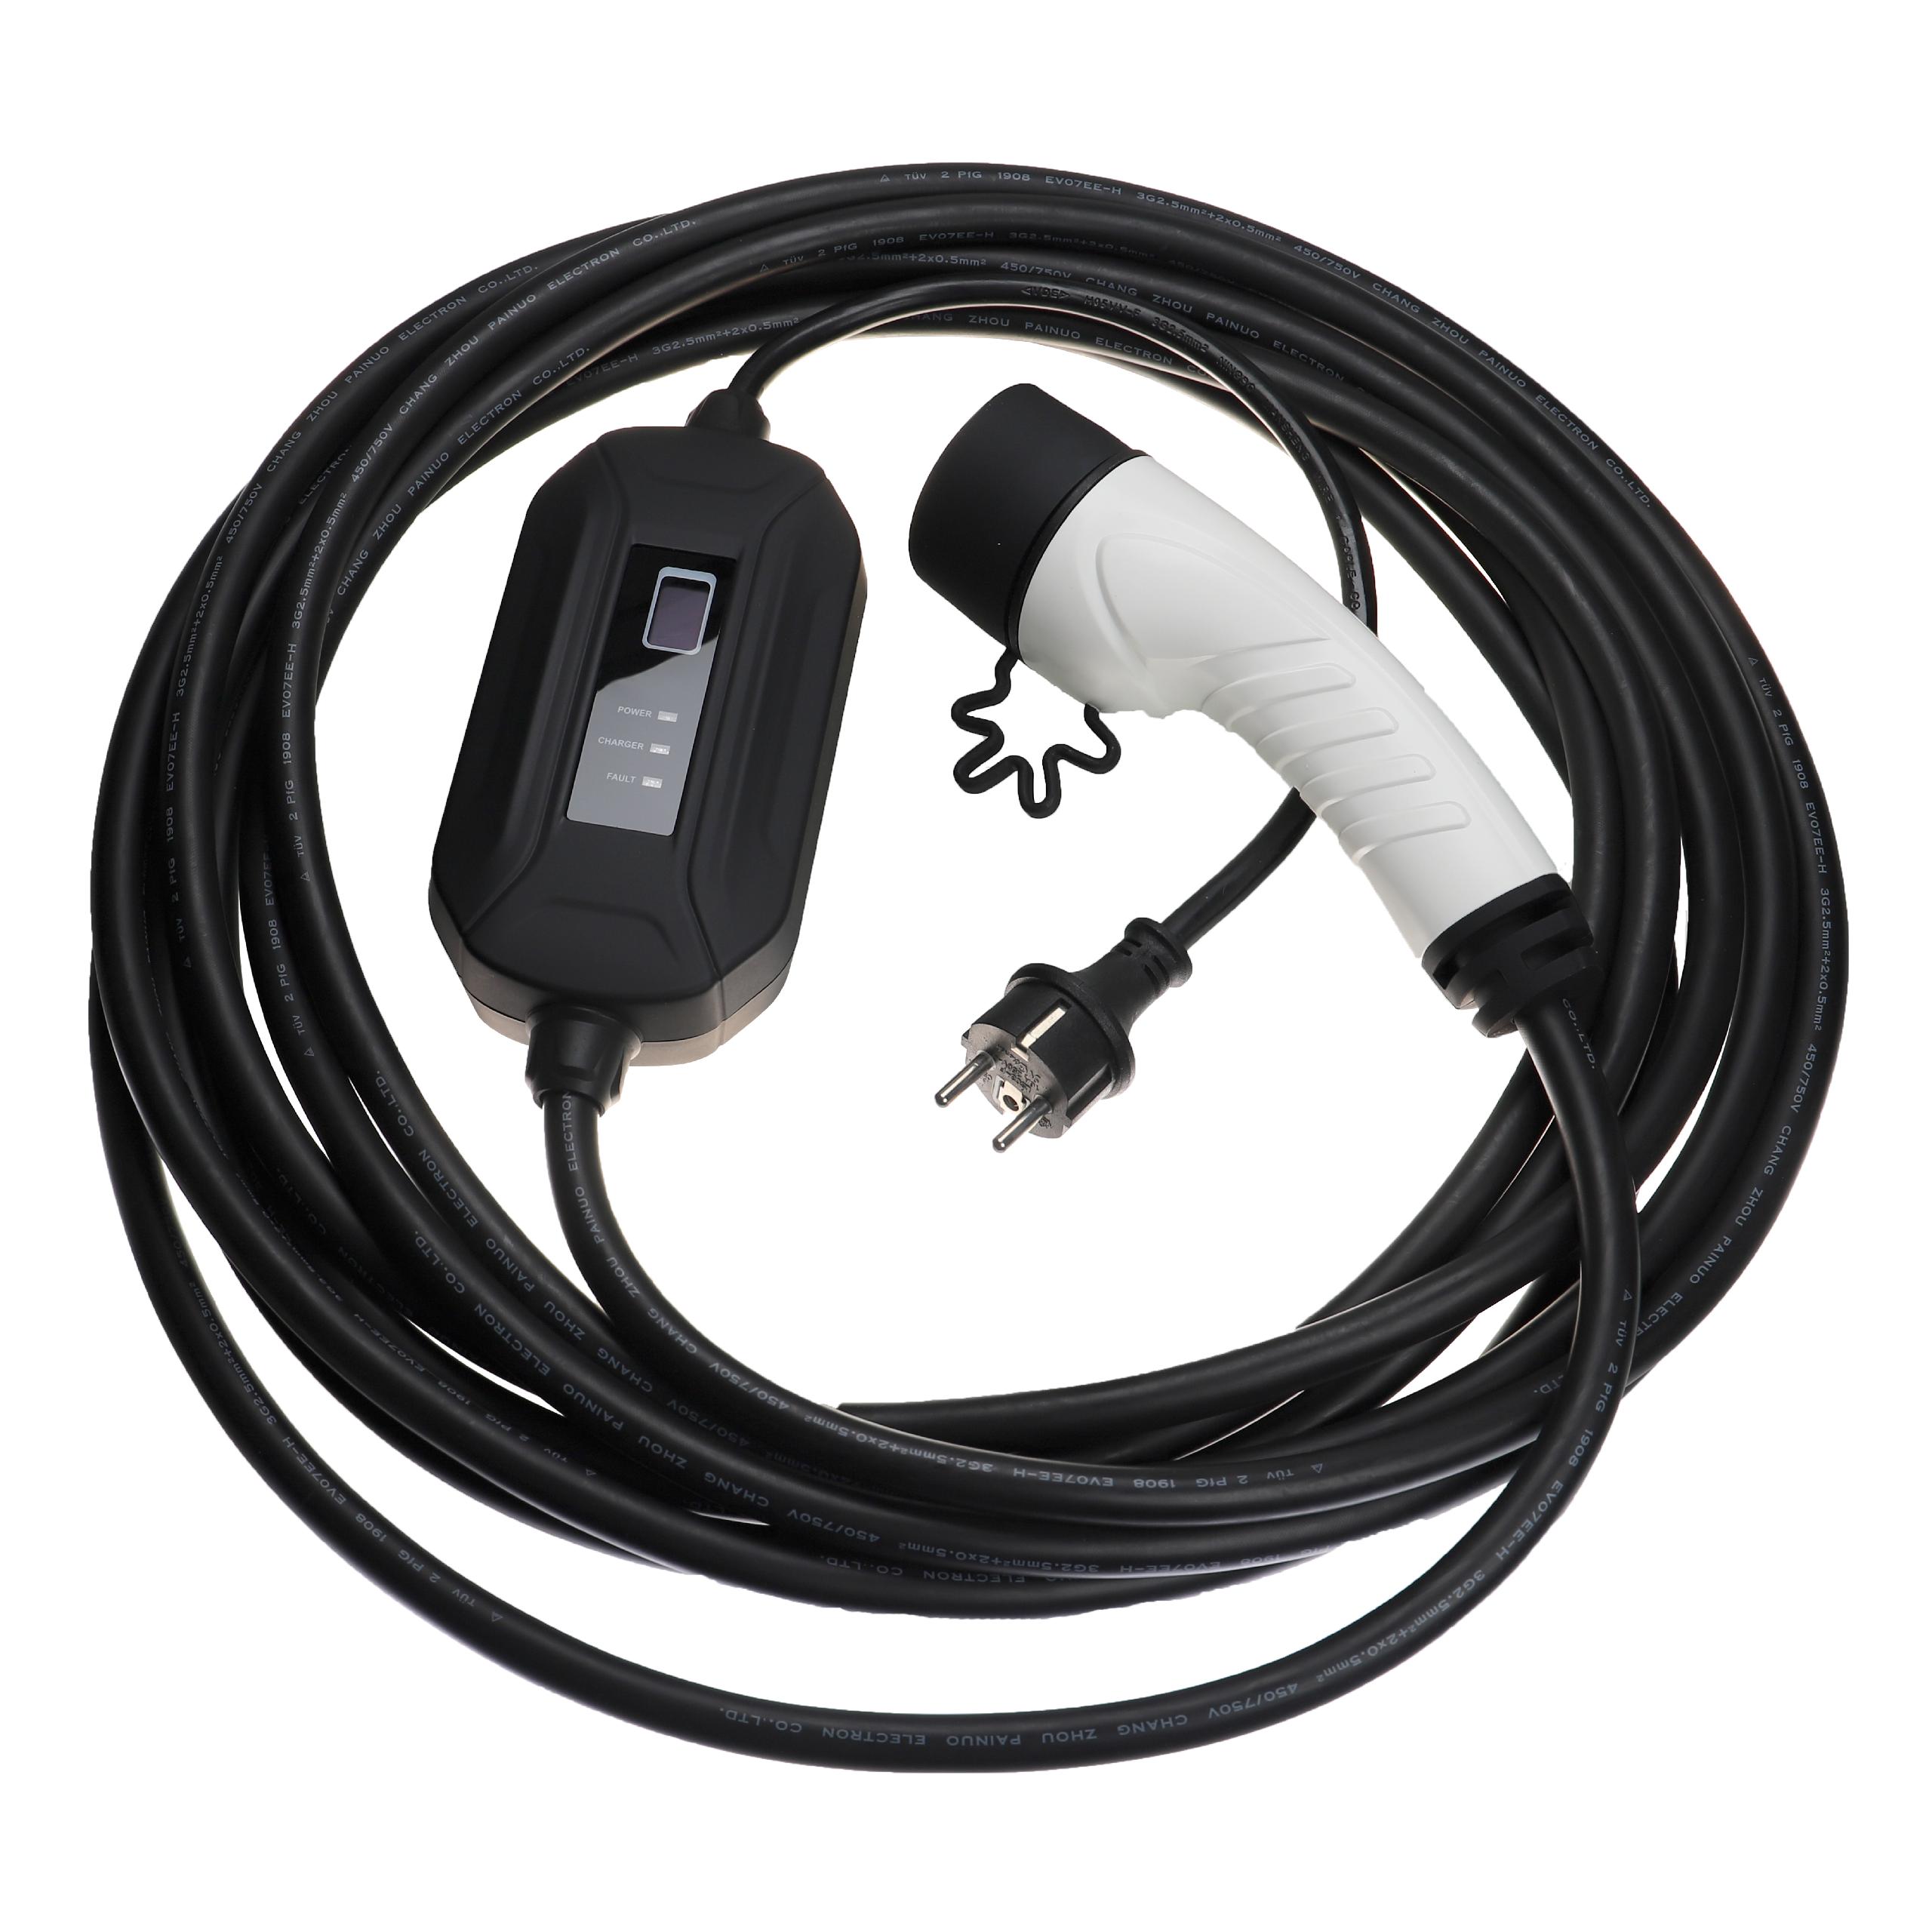 Charging cable 10m, 3.5kW, 16A for Volkswagen ID.3, ID.4, ID.5